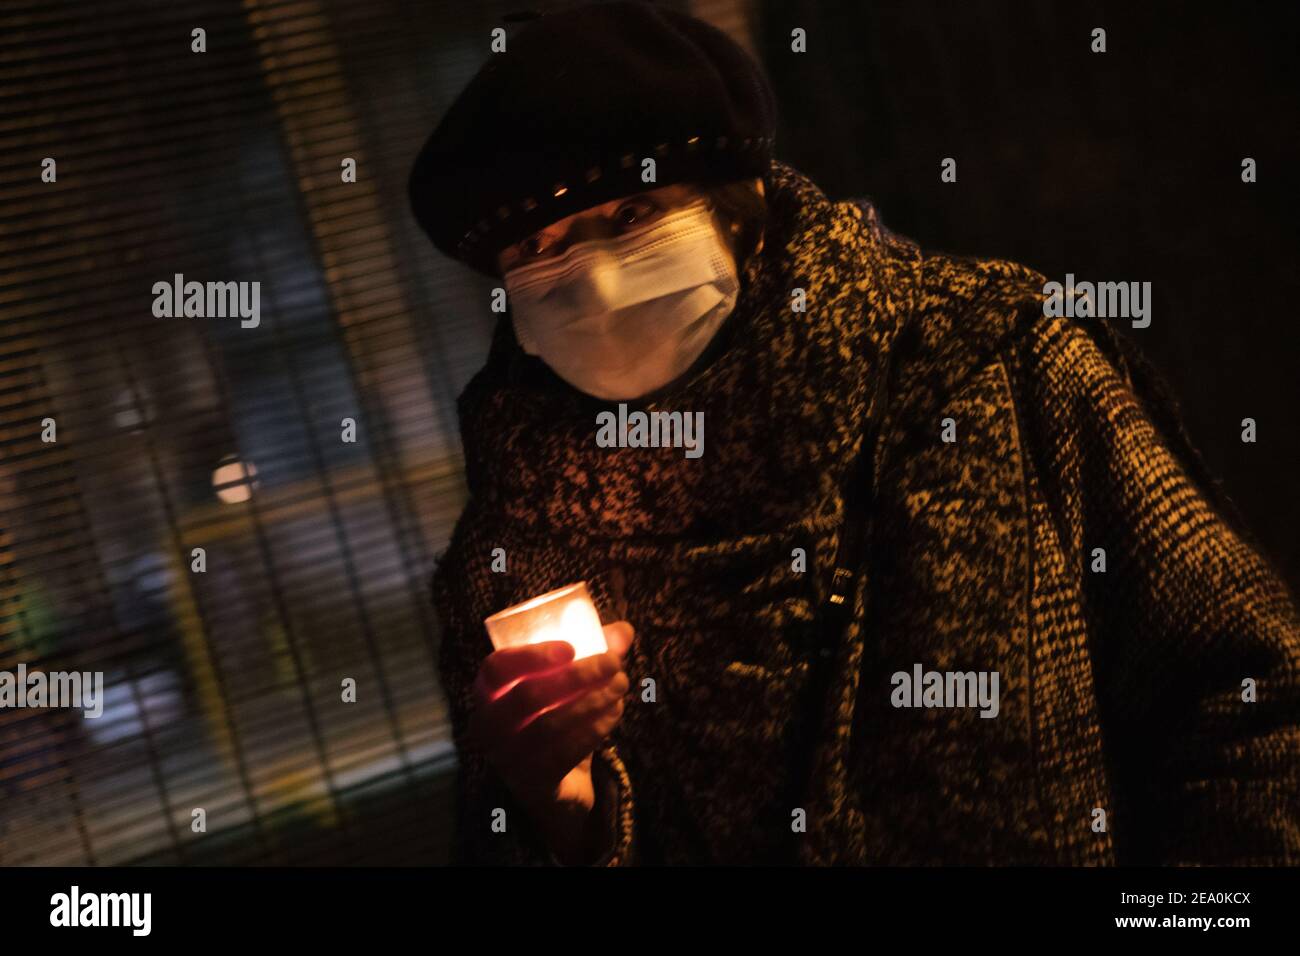 London, UK. 6th February, 2021. Candlelit vigil in remembrence of the lost trees at Euston Square, London as part of the Stop HS2 protest February 6th 2021. A woman with face covering and hat carries a candle Credit: Denise Laura Baker/Alamy Live News Stock Photo